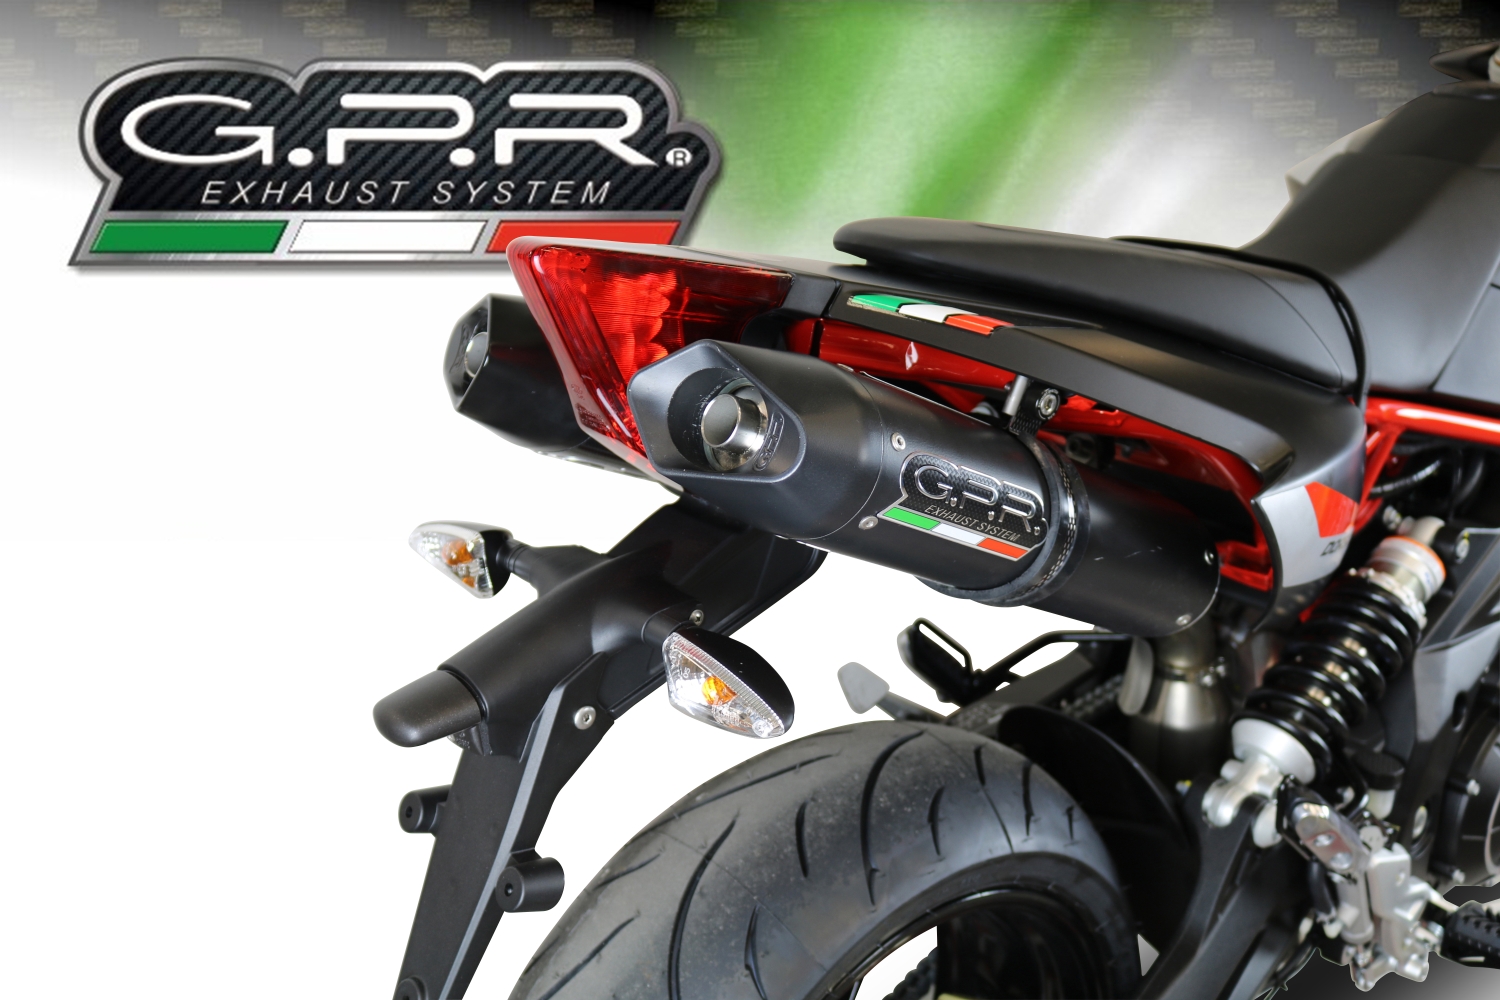 Exhaust system compatible with Aprilia Dorsoduro 750 2008-2016, Furore Nero, Dual Homologated legal slip-on exhaust including removable db killers and link pipes 